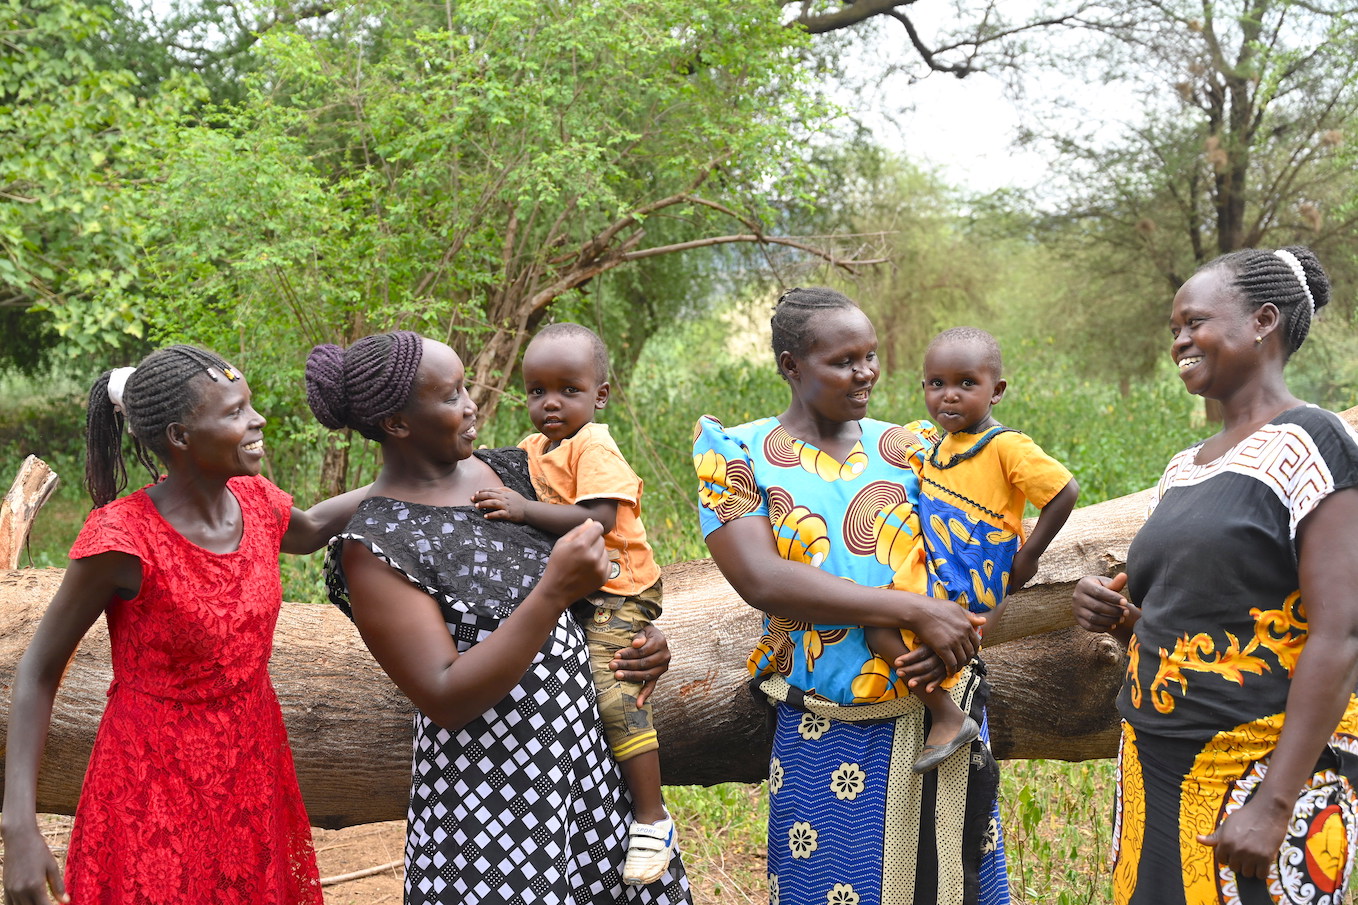 Women lead happy lives with their children and families, thanks to the increased fodder that has improved productivity in their livestock, giving them suffcient milk for home consumption and income generation.